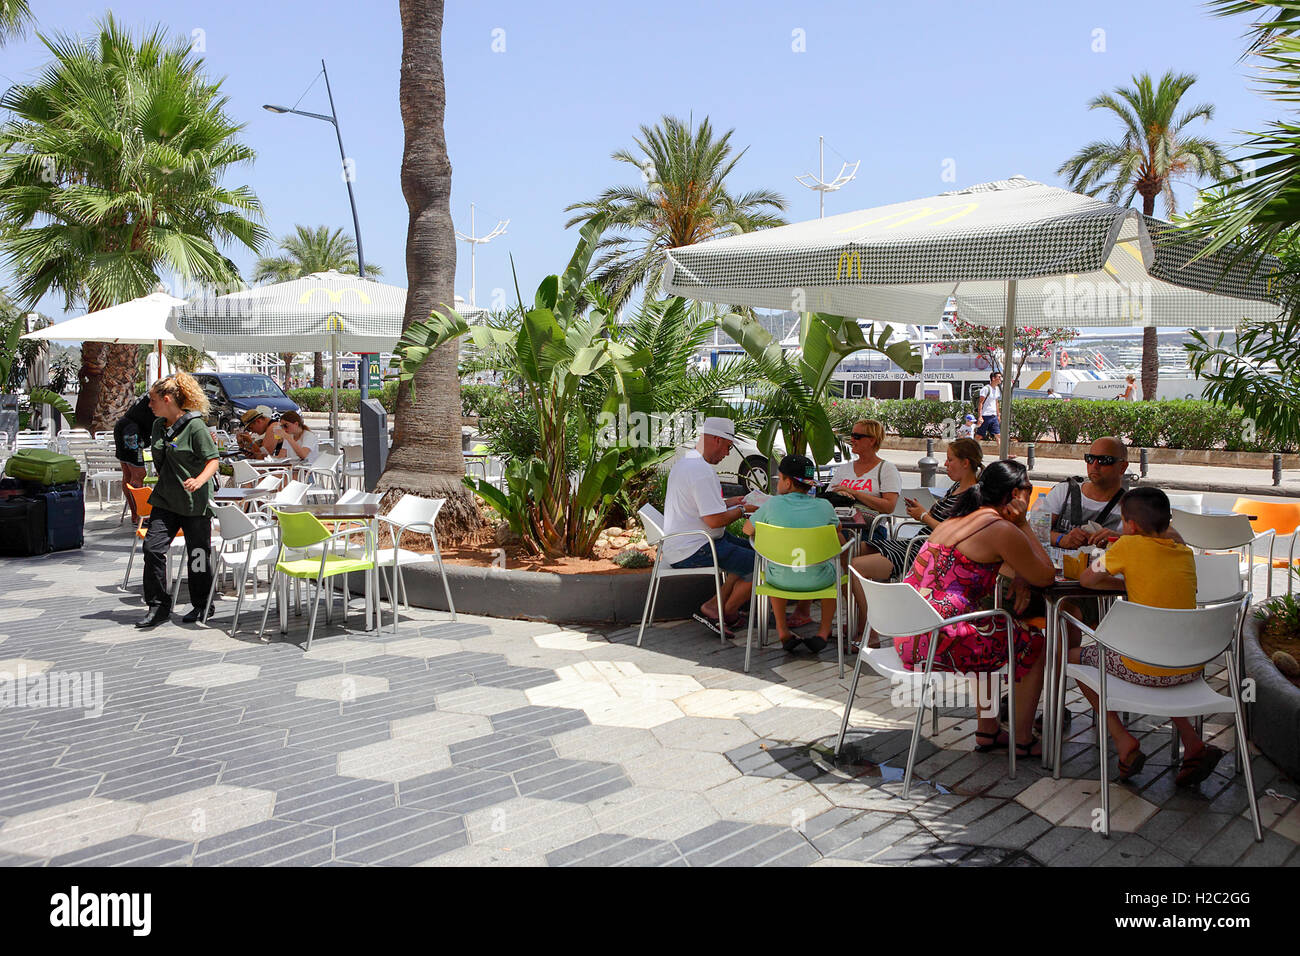 Fast food company McDonald's outlet on the island of Ibiza, Spain. Stock Photo